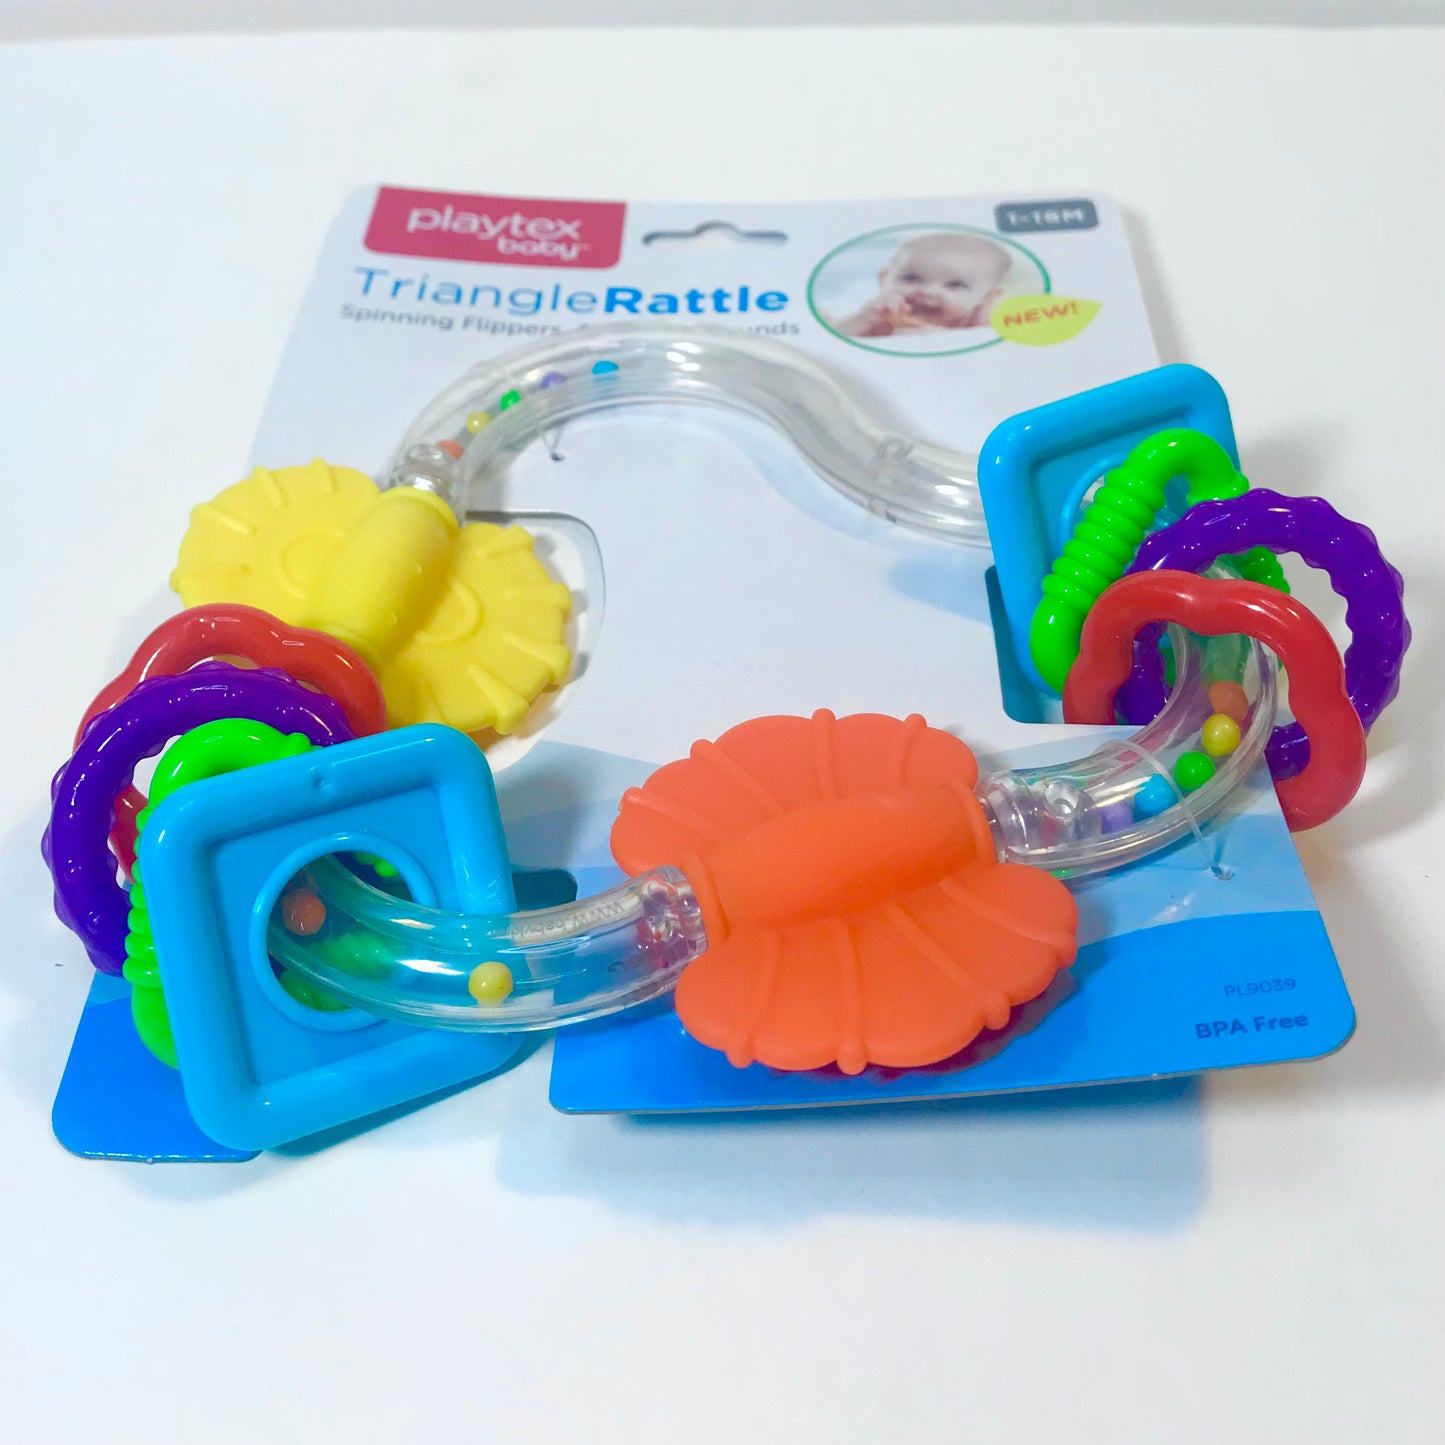 Baby Triangle Rattle by Playtex, Multicolor, For 1-18 Months, Brand New